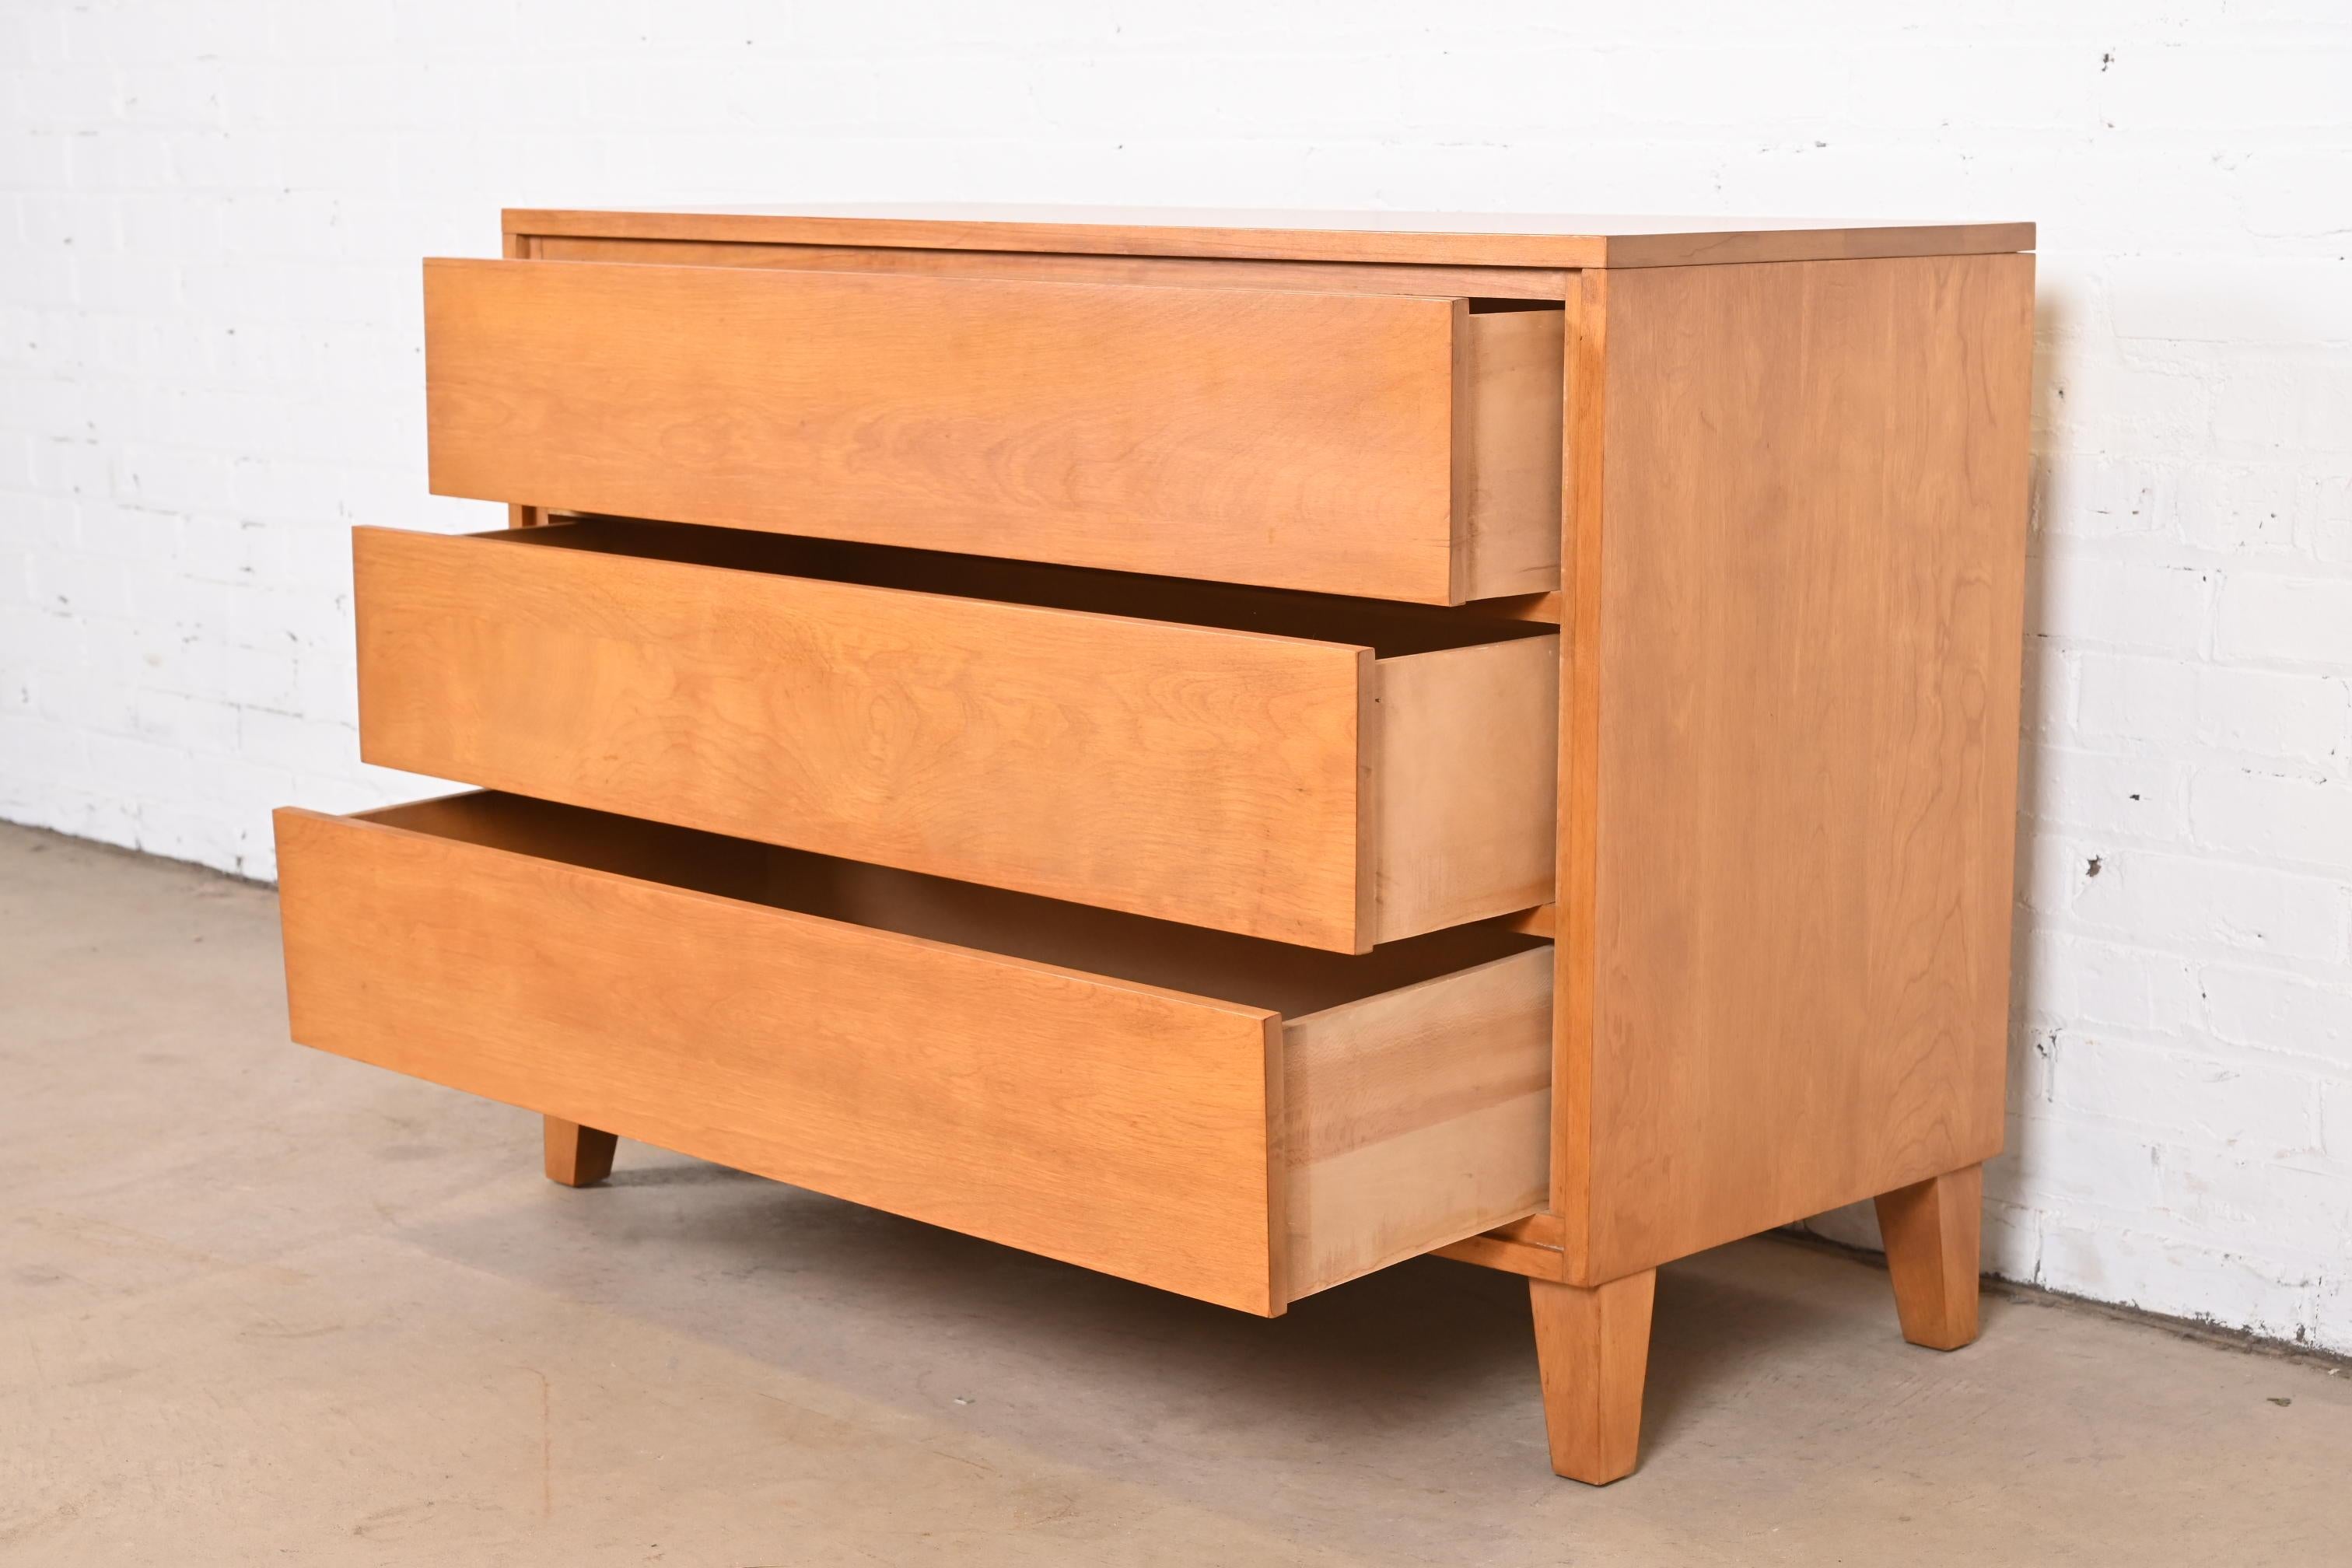 Leslie Diamond for Conant Ball Mid-Century Modern Solid Birch Dresser, 1950s In Good Condition For Sale In South Bend, IN